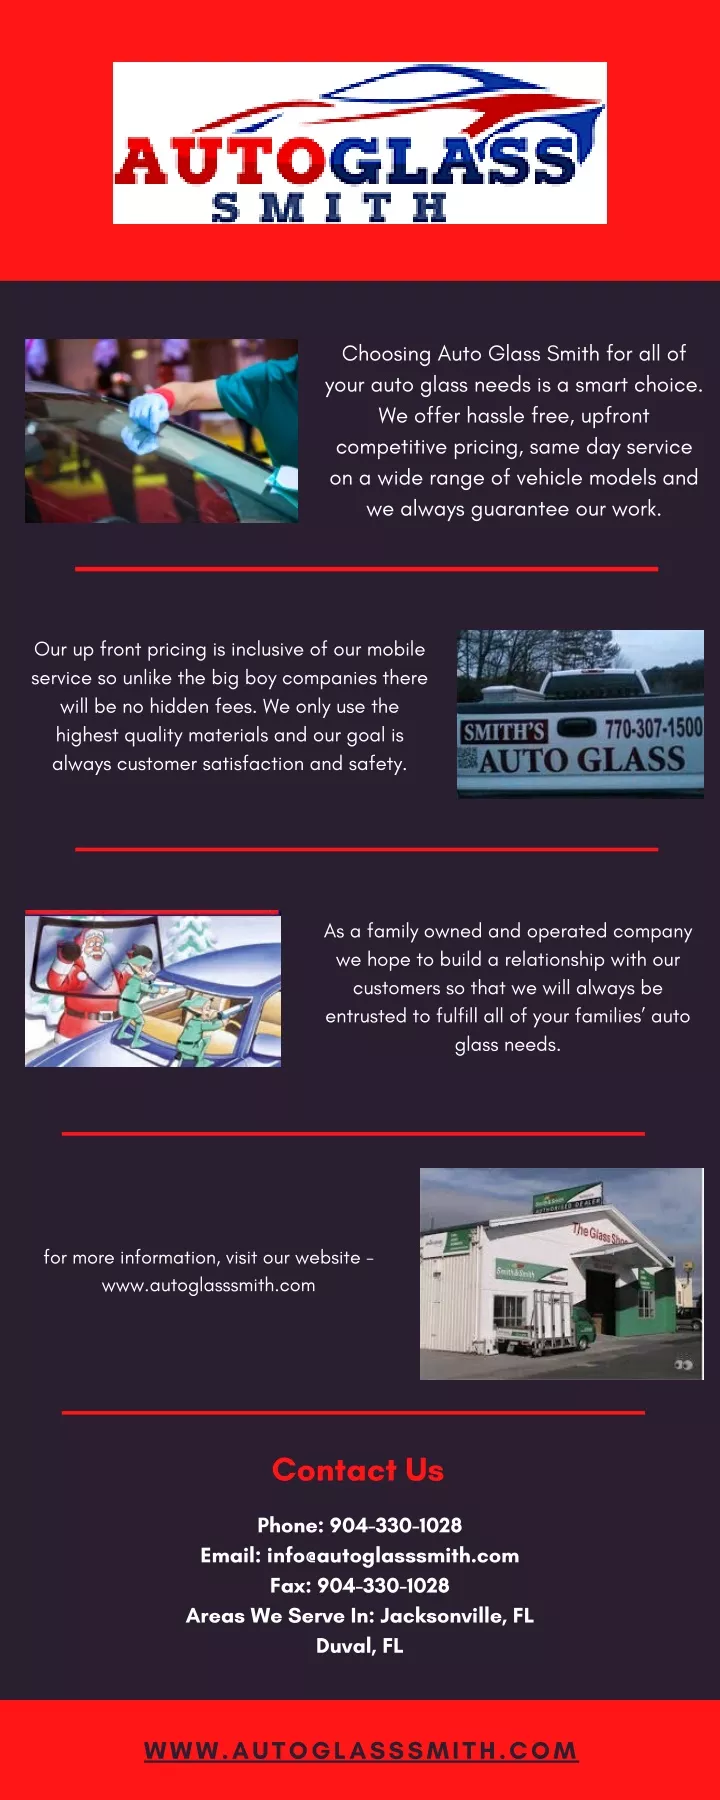 choosing auto glass smith for all of your auto